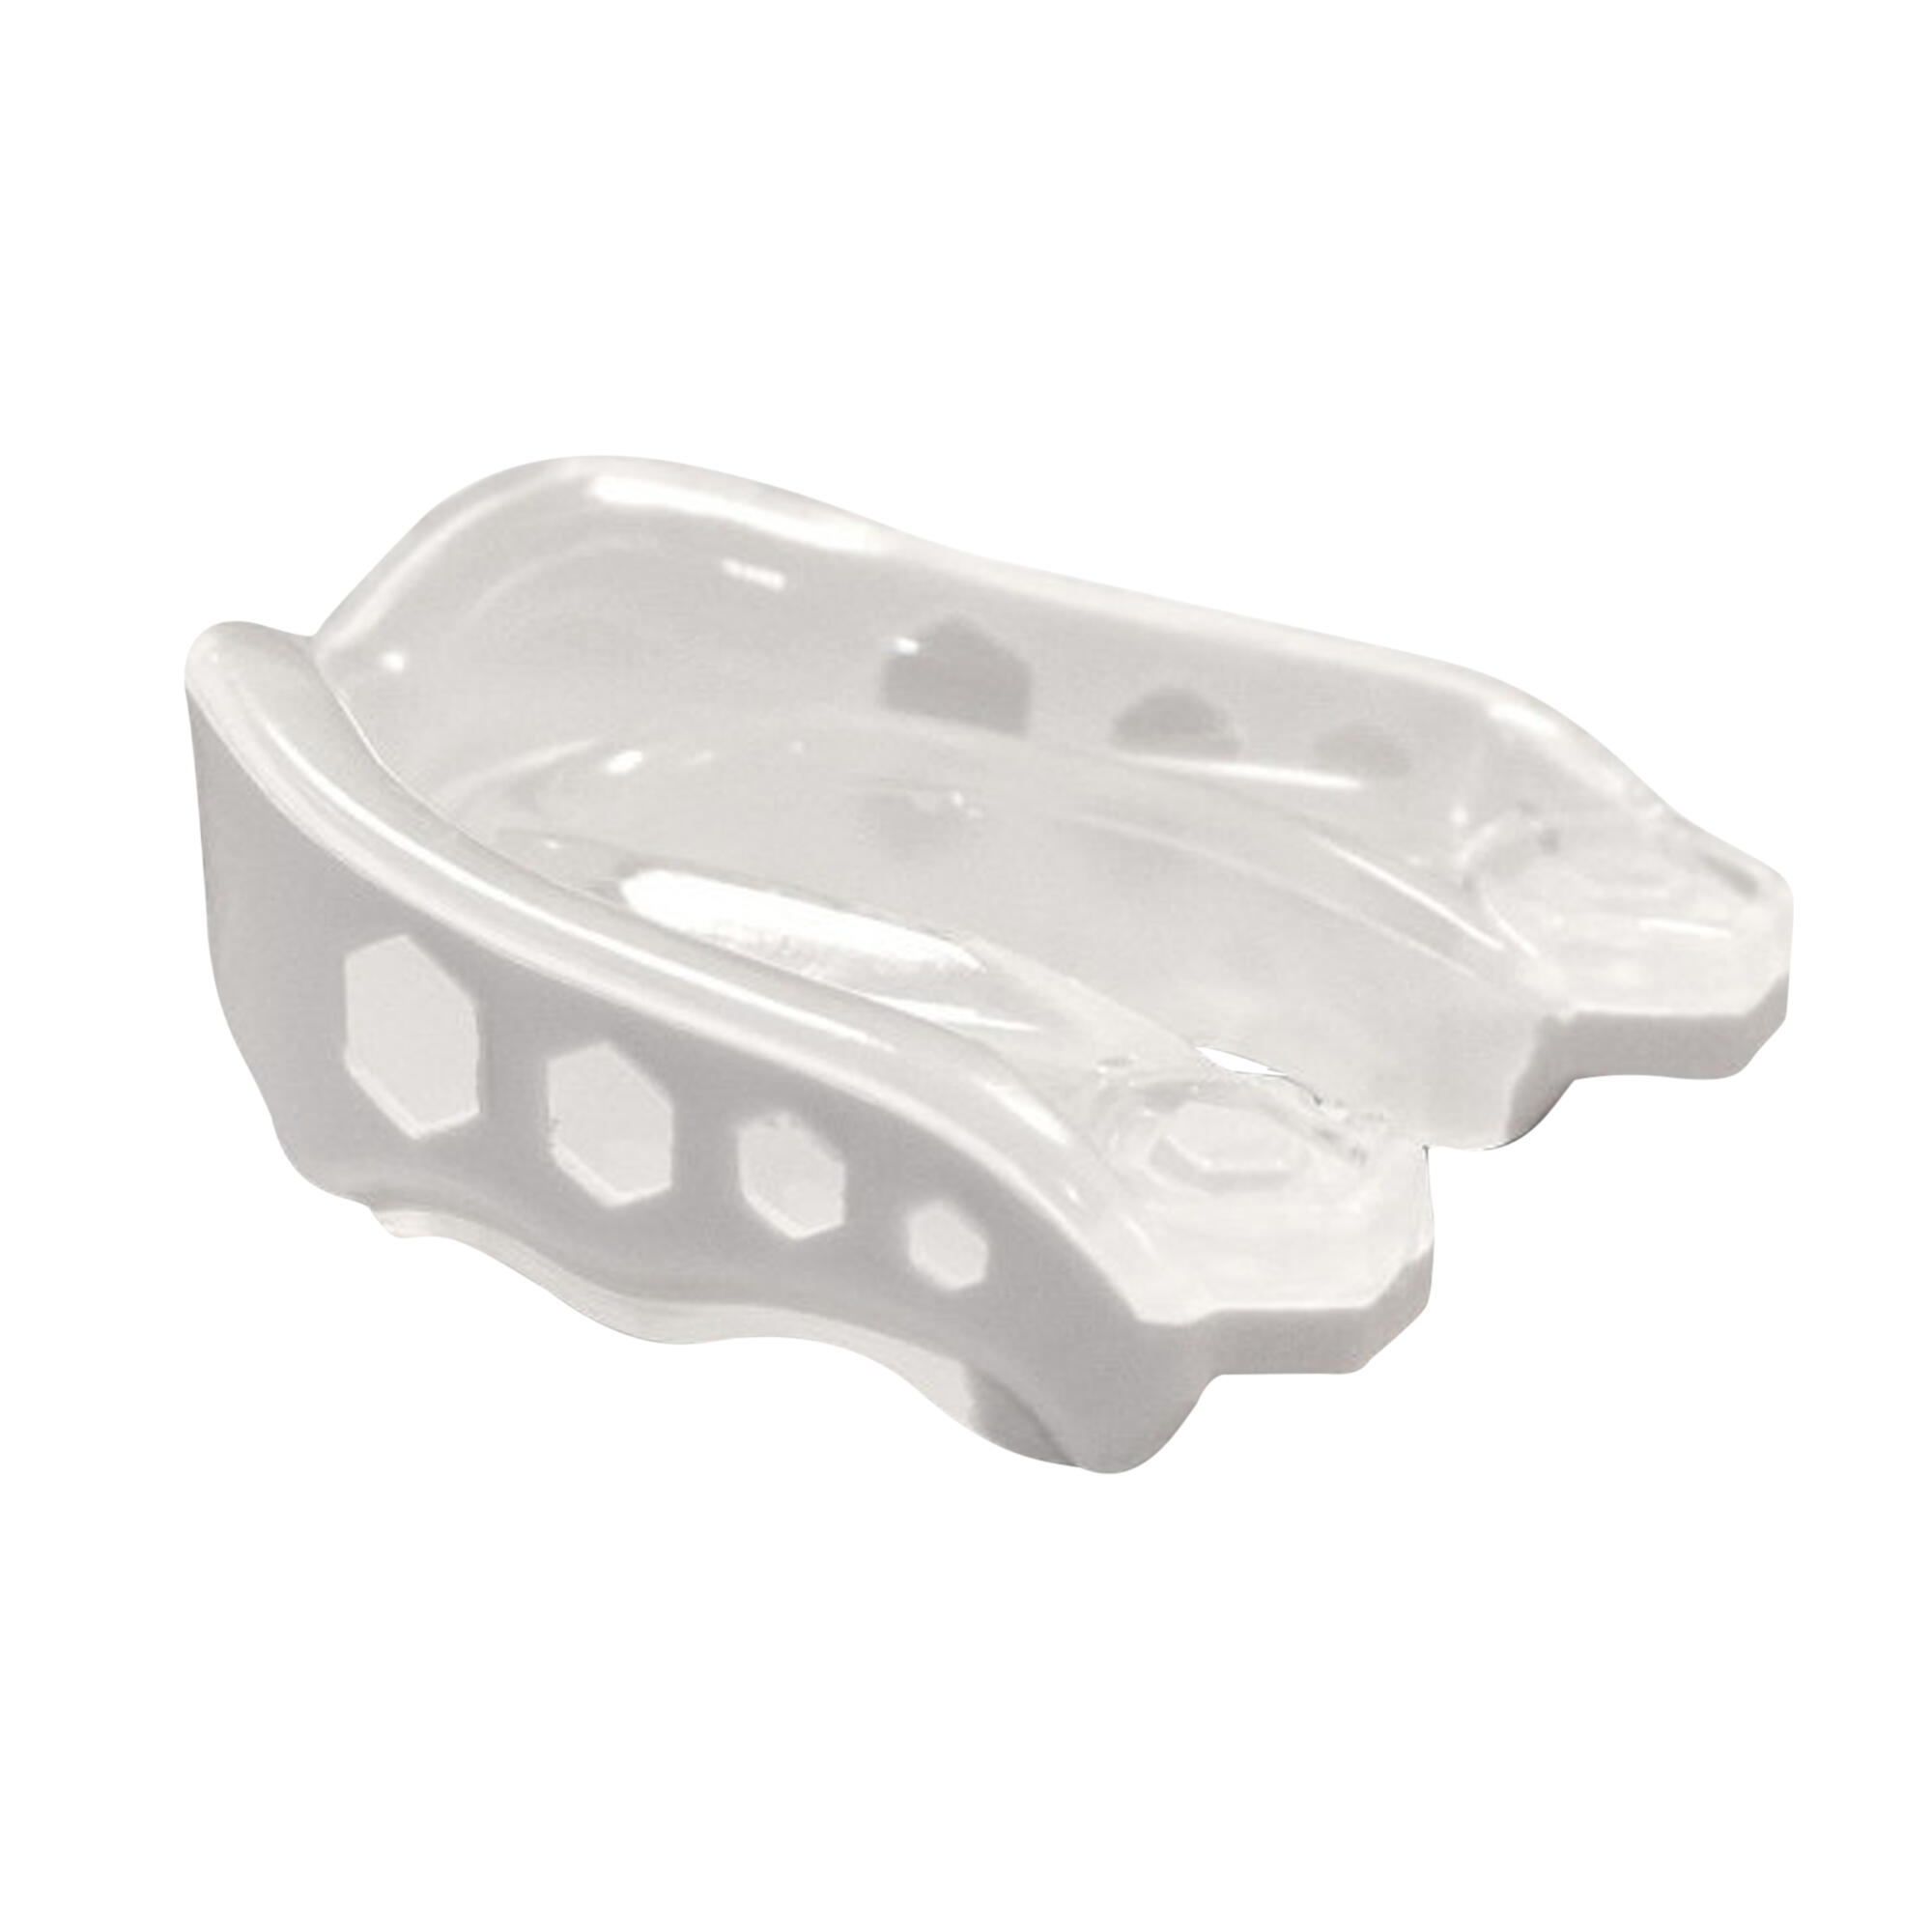 Unisex Adult Gel Max Mouthguard (White) 2/3